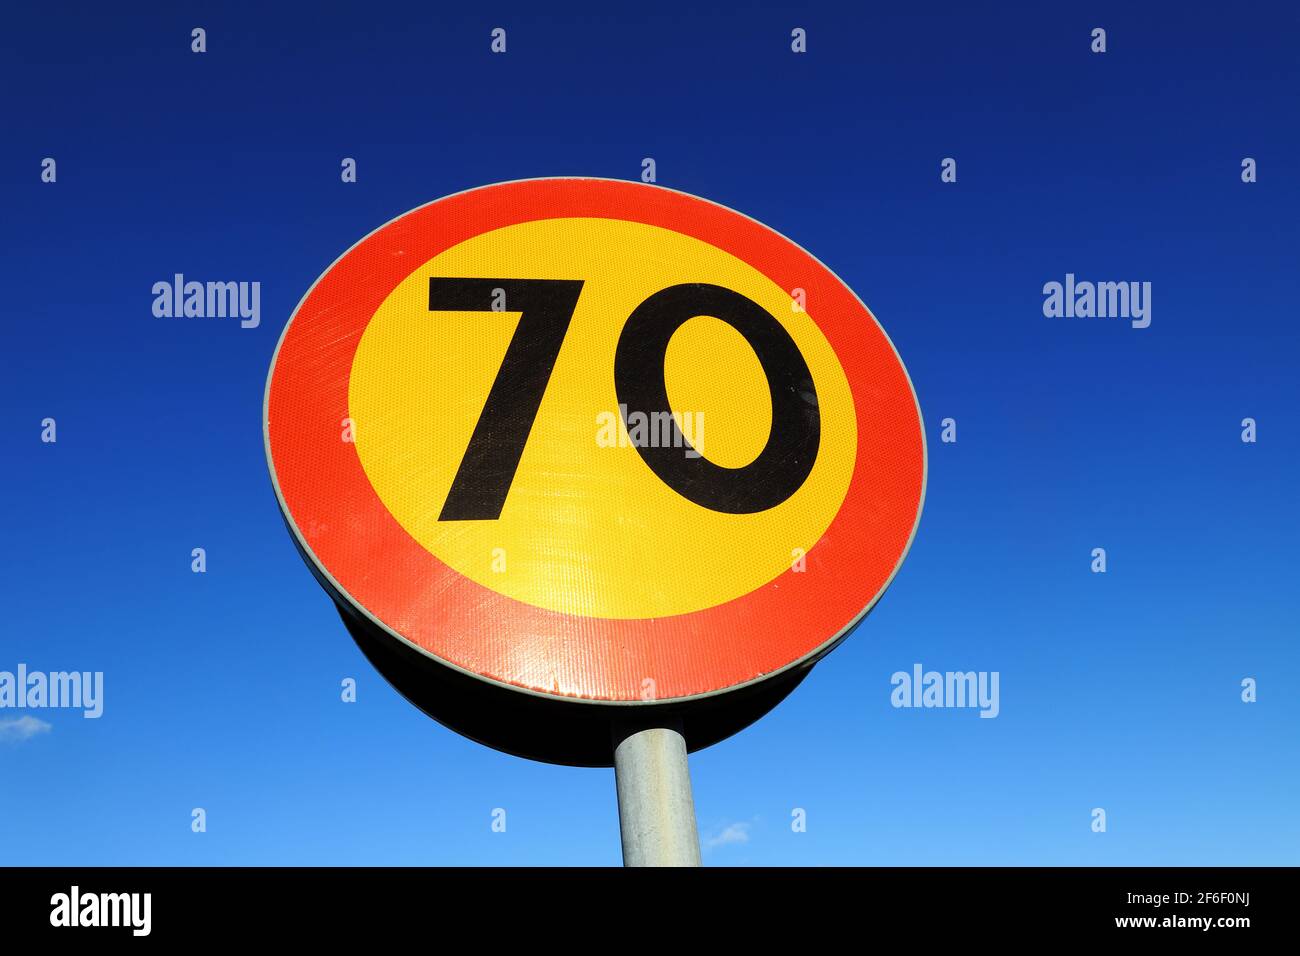 Low angle view of circle shaped yellow 70 speed limit road sign with a red border against a blue sky. Stock Photo